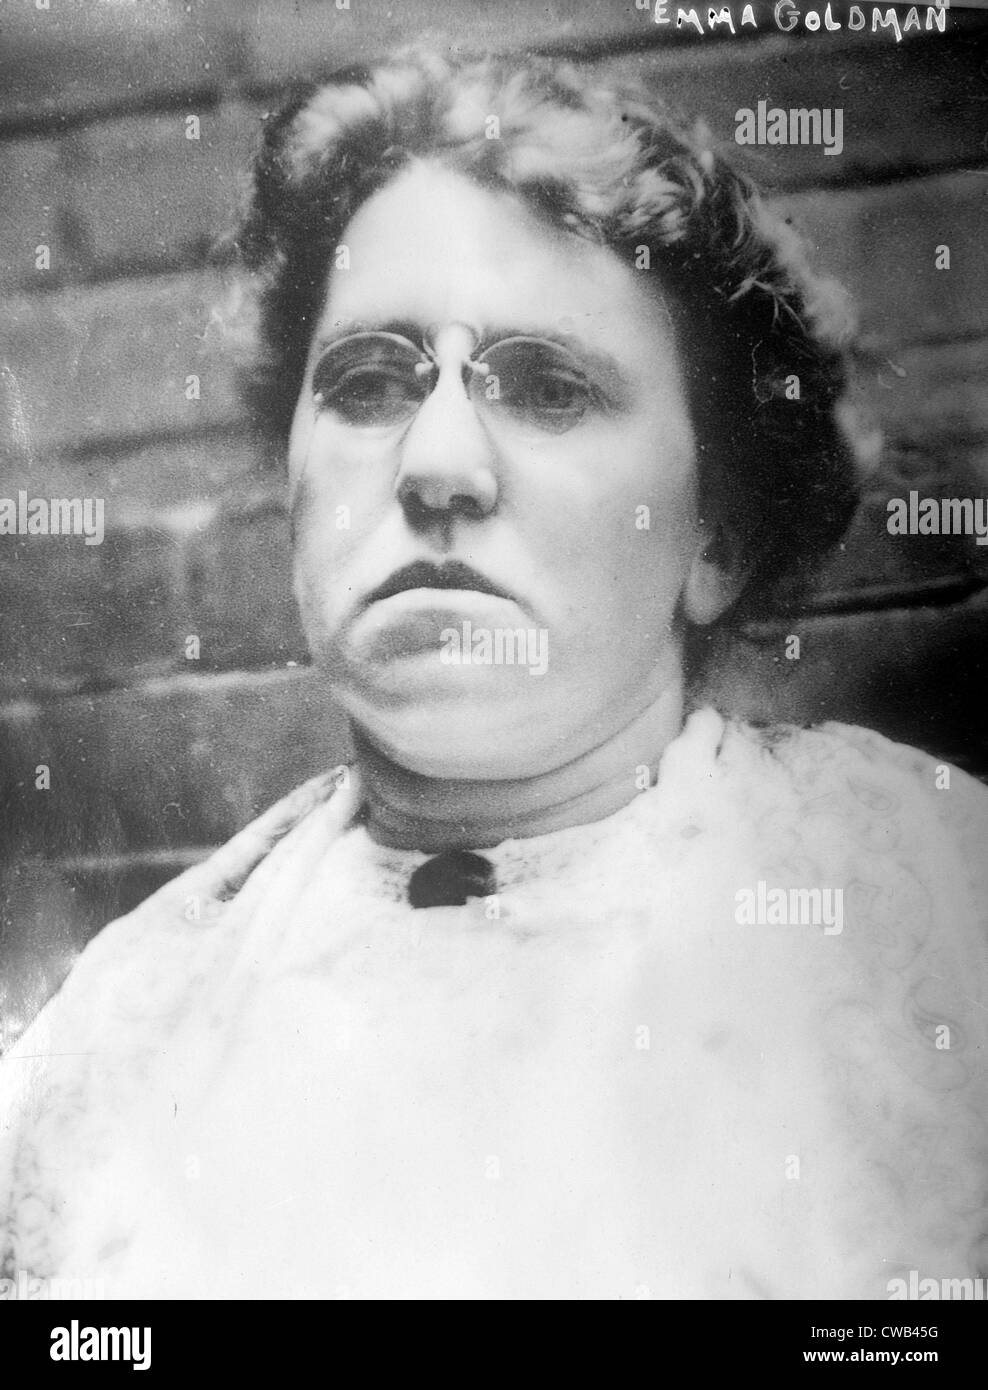 Emma Goldman. Anarchist and radical revolutionary, she was deported in 1919. photo 1907. Stock Photo